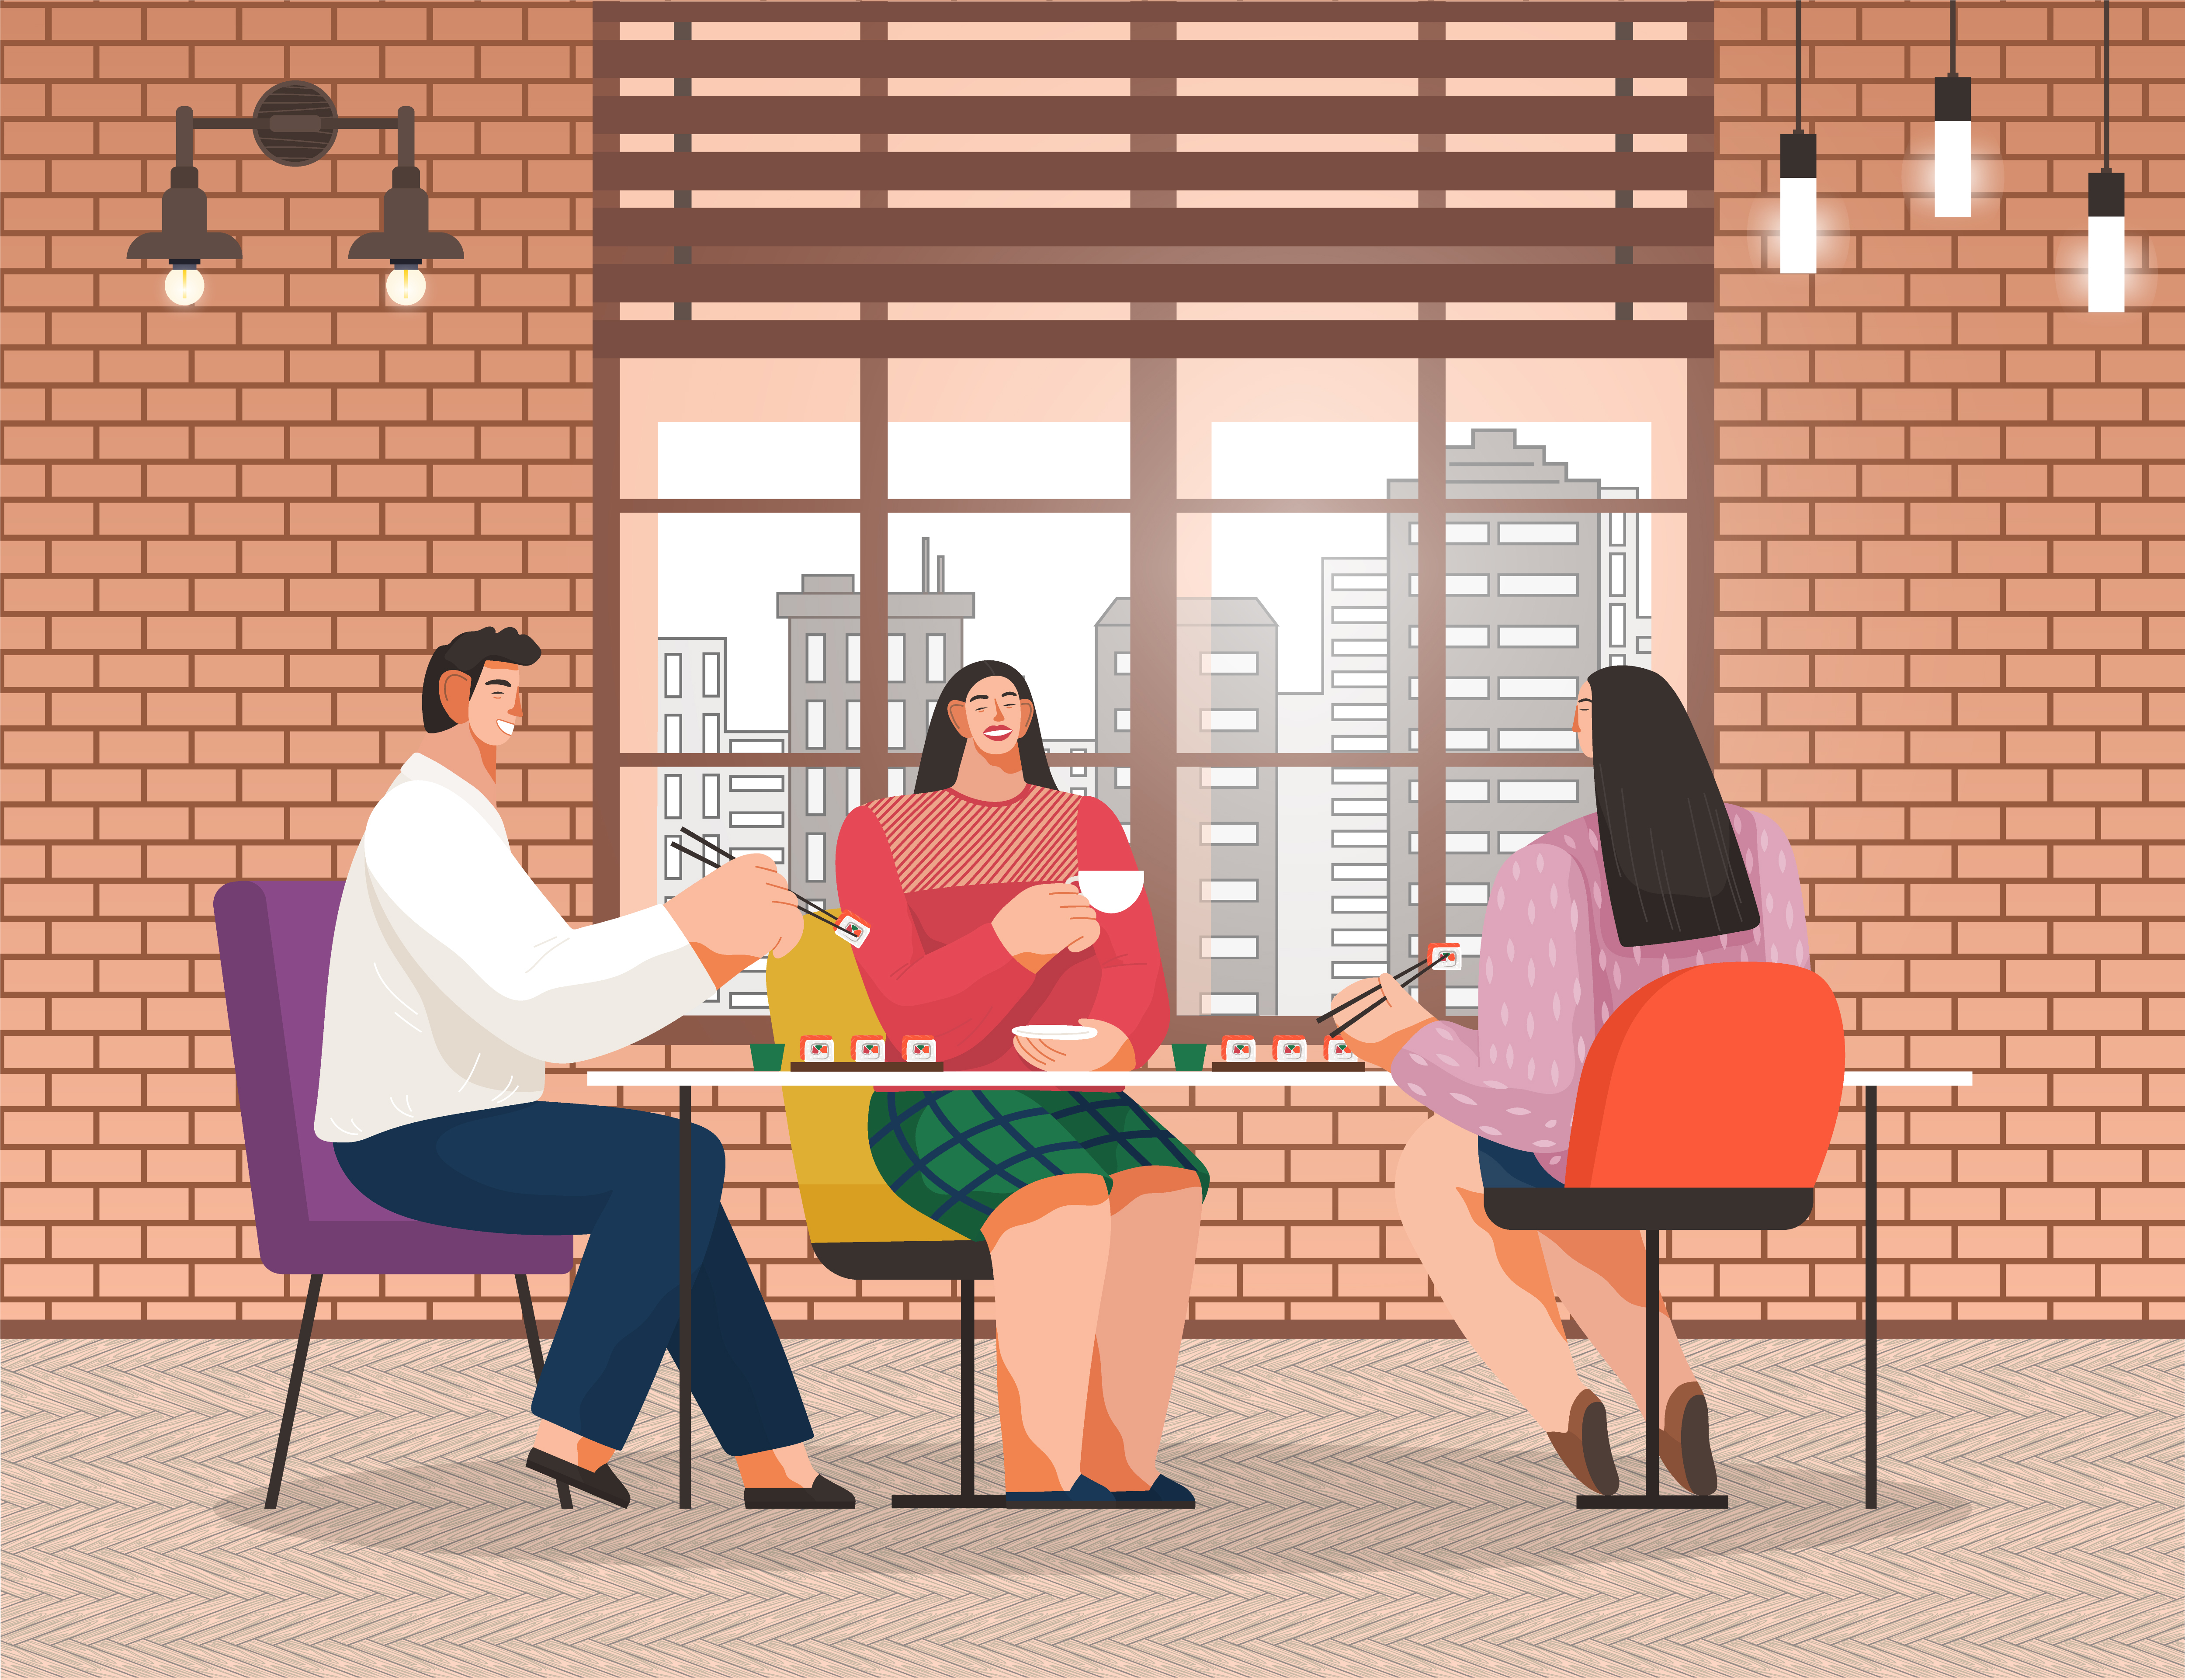 People eating sushi in japanese restaurant. Friends on meeting or break in cozy place. People talking with each other. Cafe interior with big window with urban landscape. Vector illustration in flat. Friends Eat in Japanese Restaurant, Cafe Interior